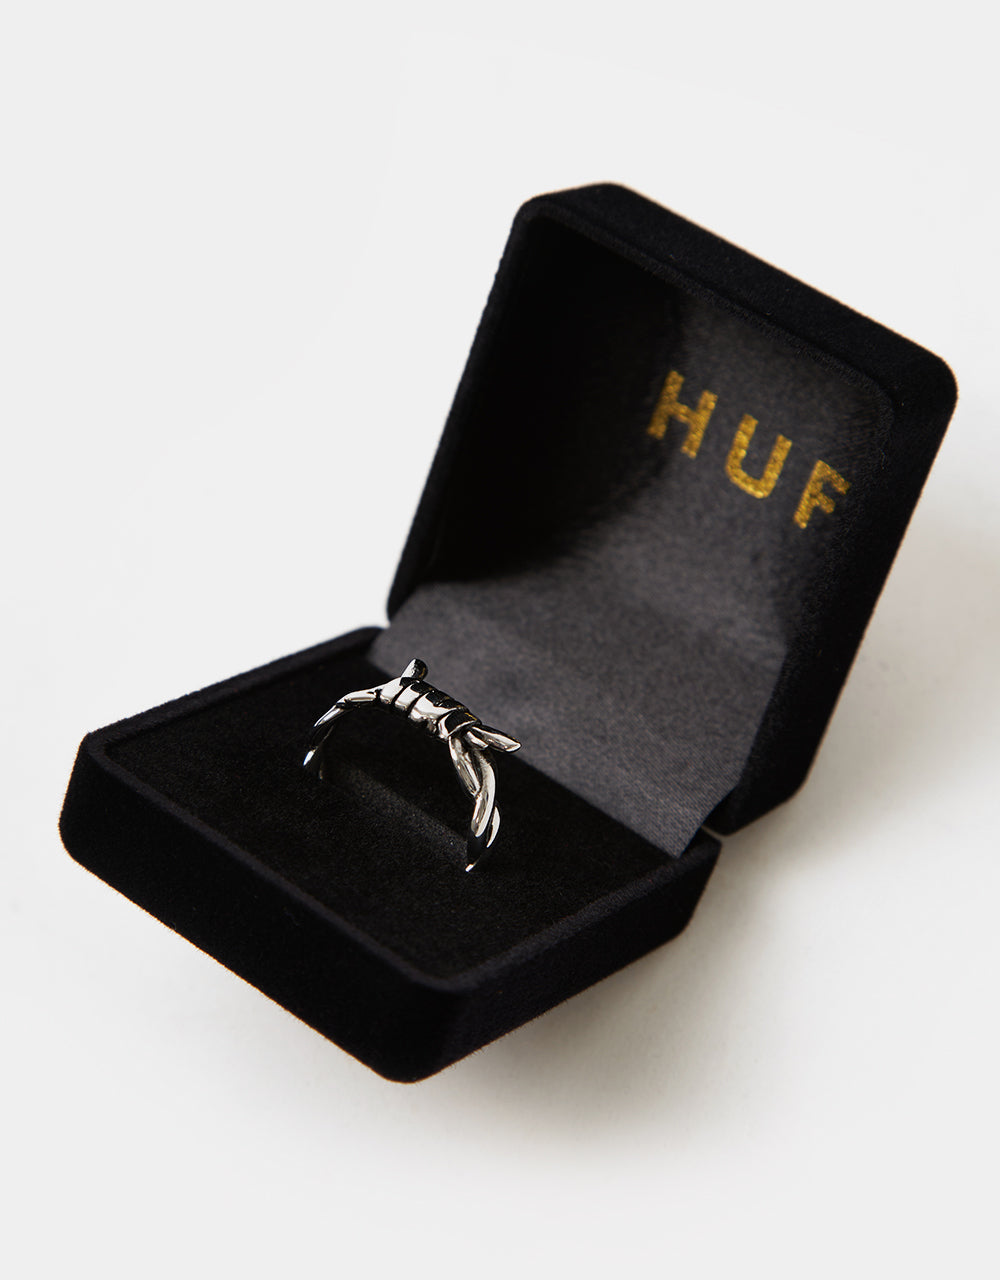 HUF Barbed Wire Ring - Silver